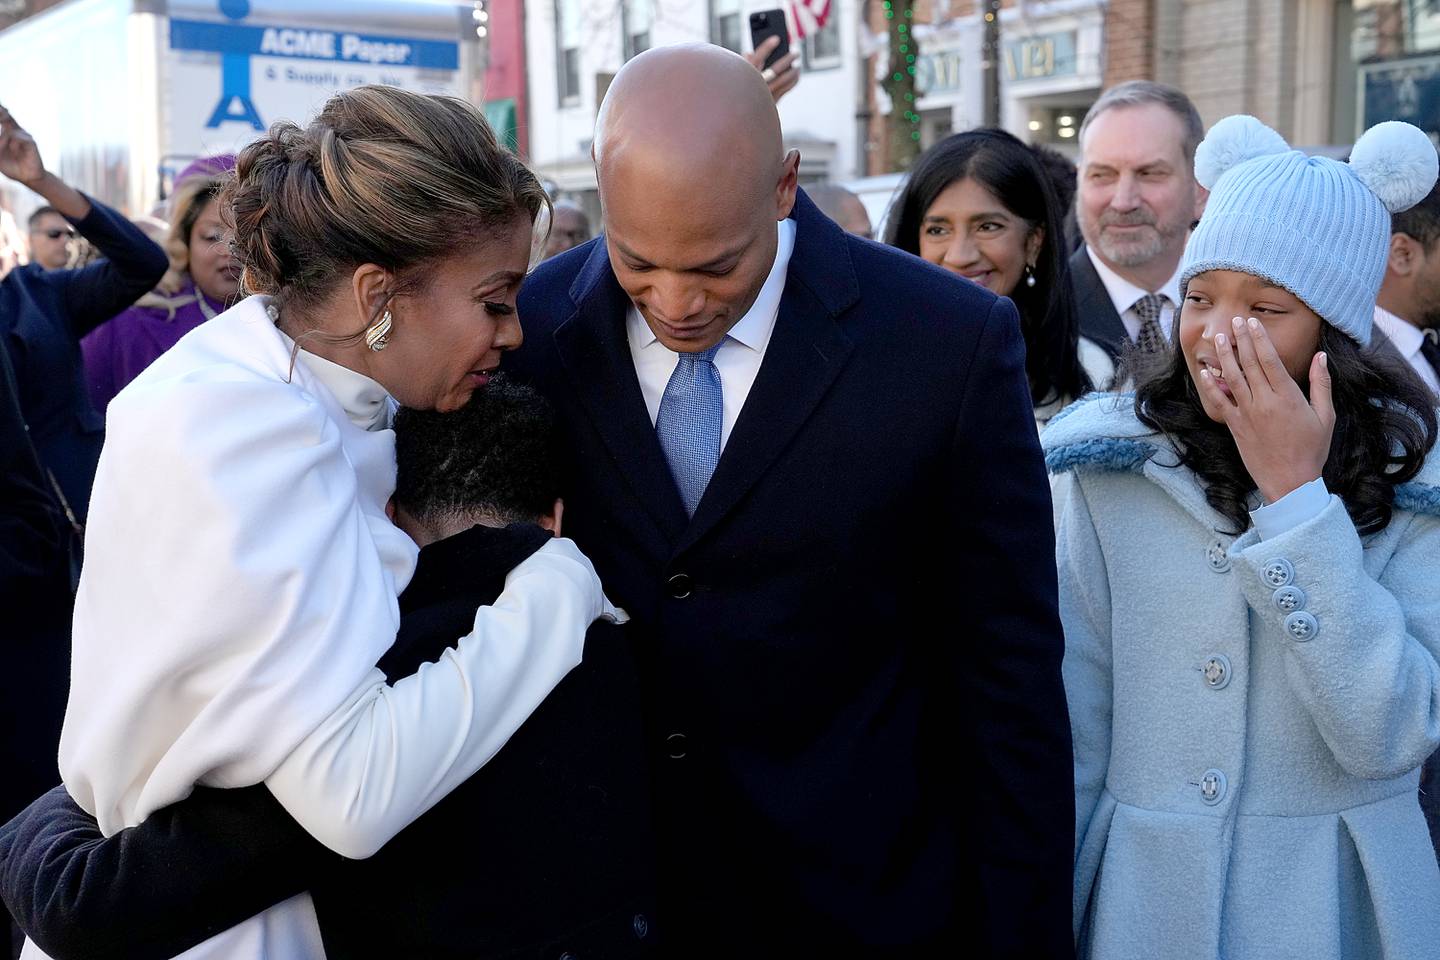 Dawn Flythe Moore, son James Moore, Gov.-elect Wes Moore and daughter Mia Moore as they depart from the Kunta Kinte-Alex Haley Memorial, where they laid a wreath and said a prayer before the governor-elect was sworn in as the first African American governor of the state of Maryland.